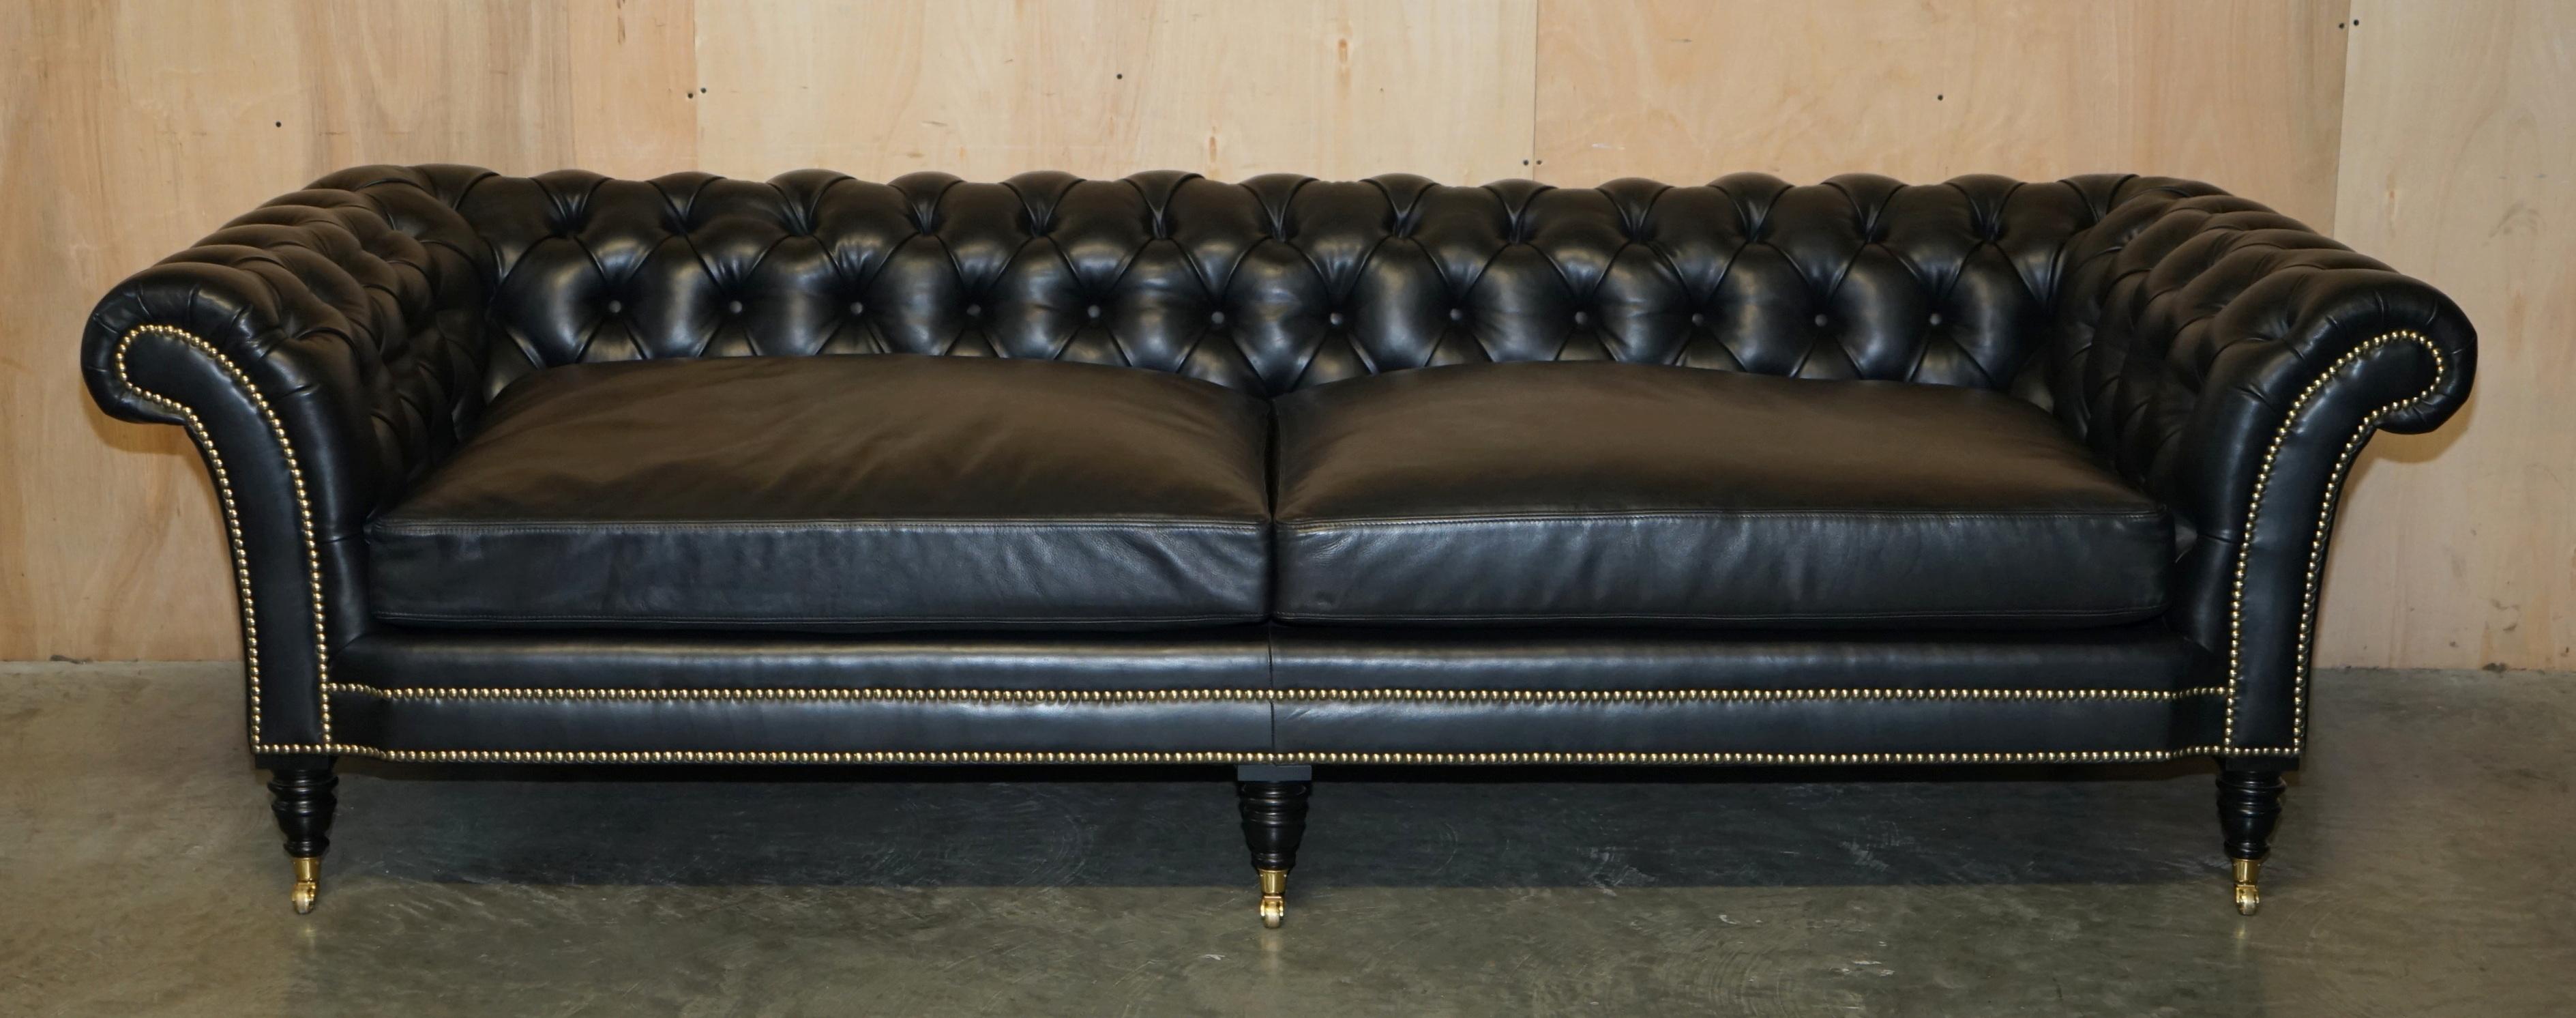 EXQUISITE PAIR OF RALPH LAUREN BROOK STREET BLACK LEATHER CHESTERFIELD SOFAs For Sale 8